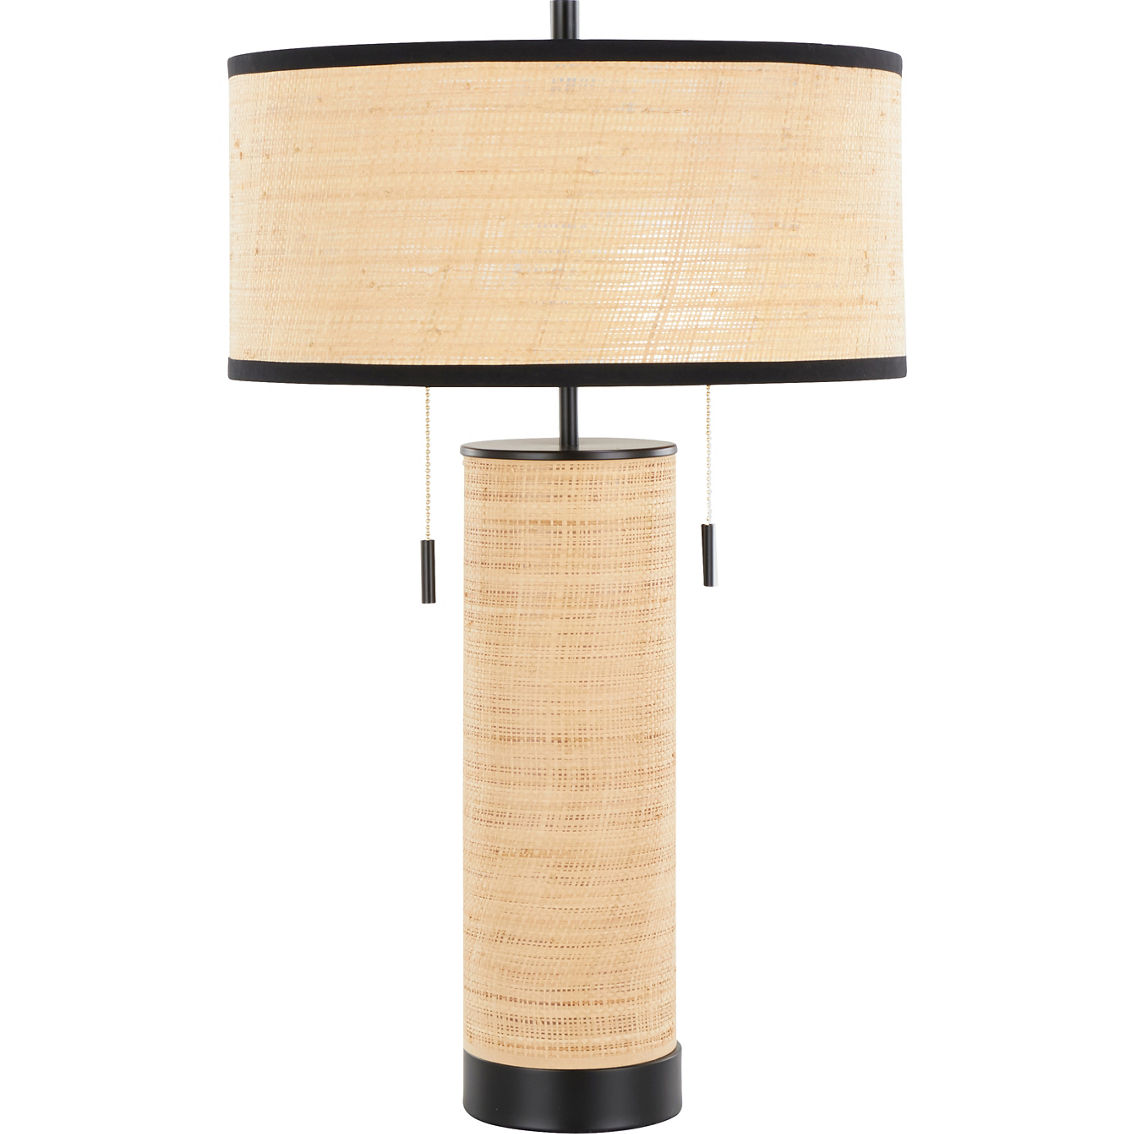 LumiSource Cylinder Rattan 29 in. Table Lamp - Image 2 of 6